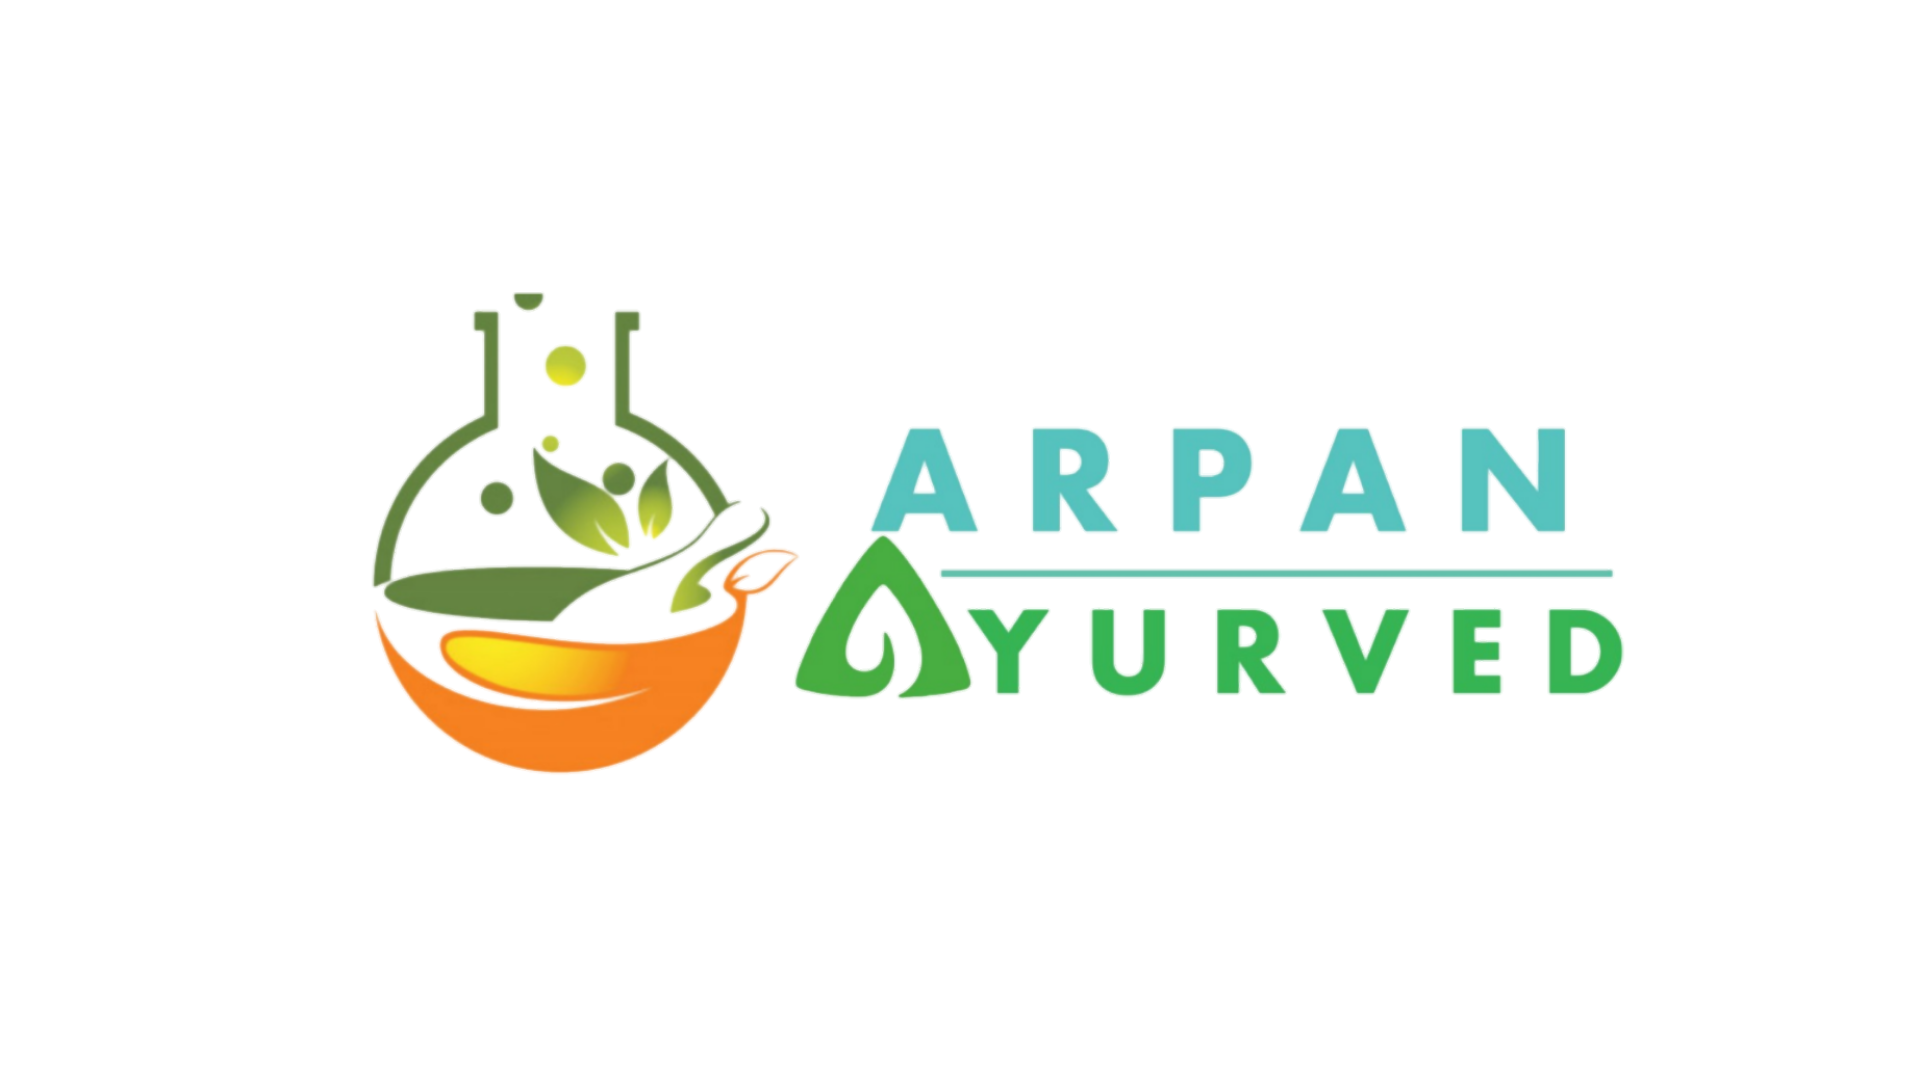 Ayurveda Logo Vector Images (over 4,400)